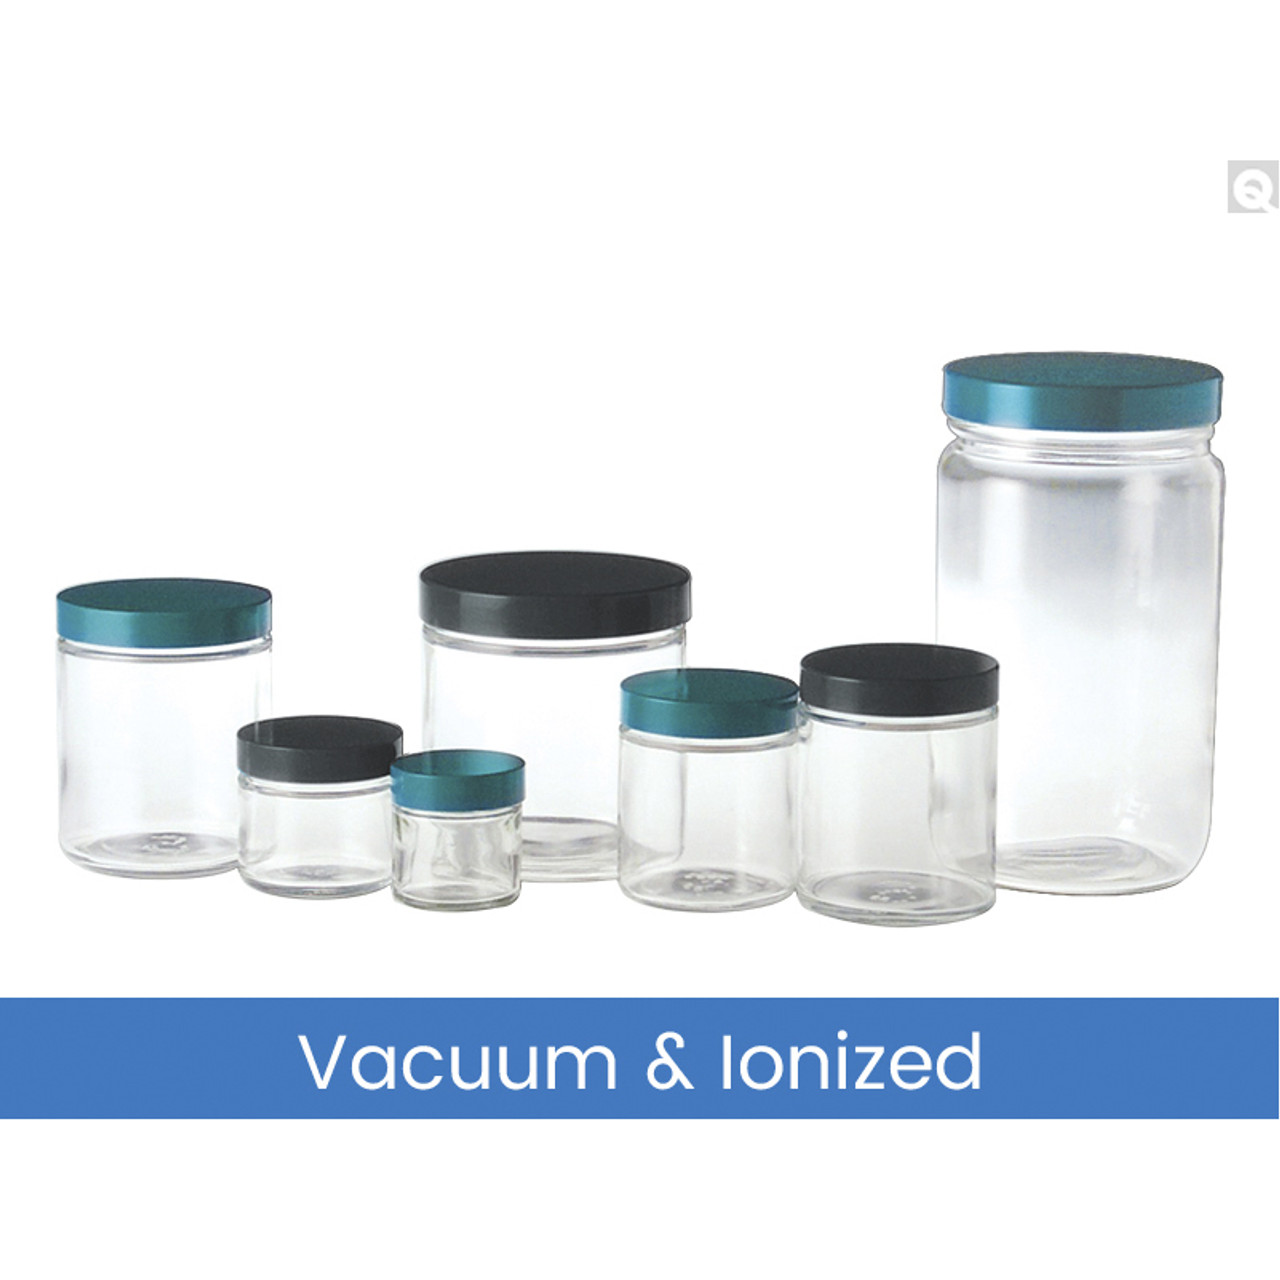 16oz (480mL) Clear Straight Sided Jar, 89-400 Green Thermoset F217 & PTFE Lined Caps, Vacuum & Ionized, case/12